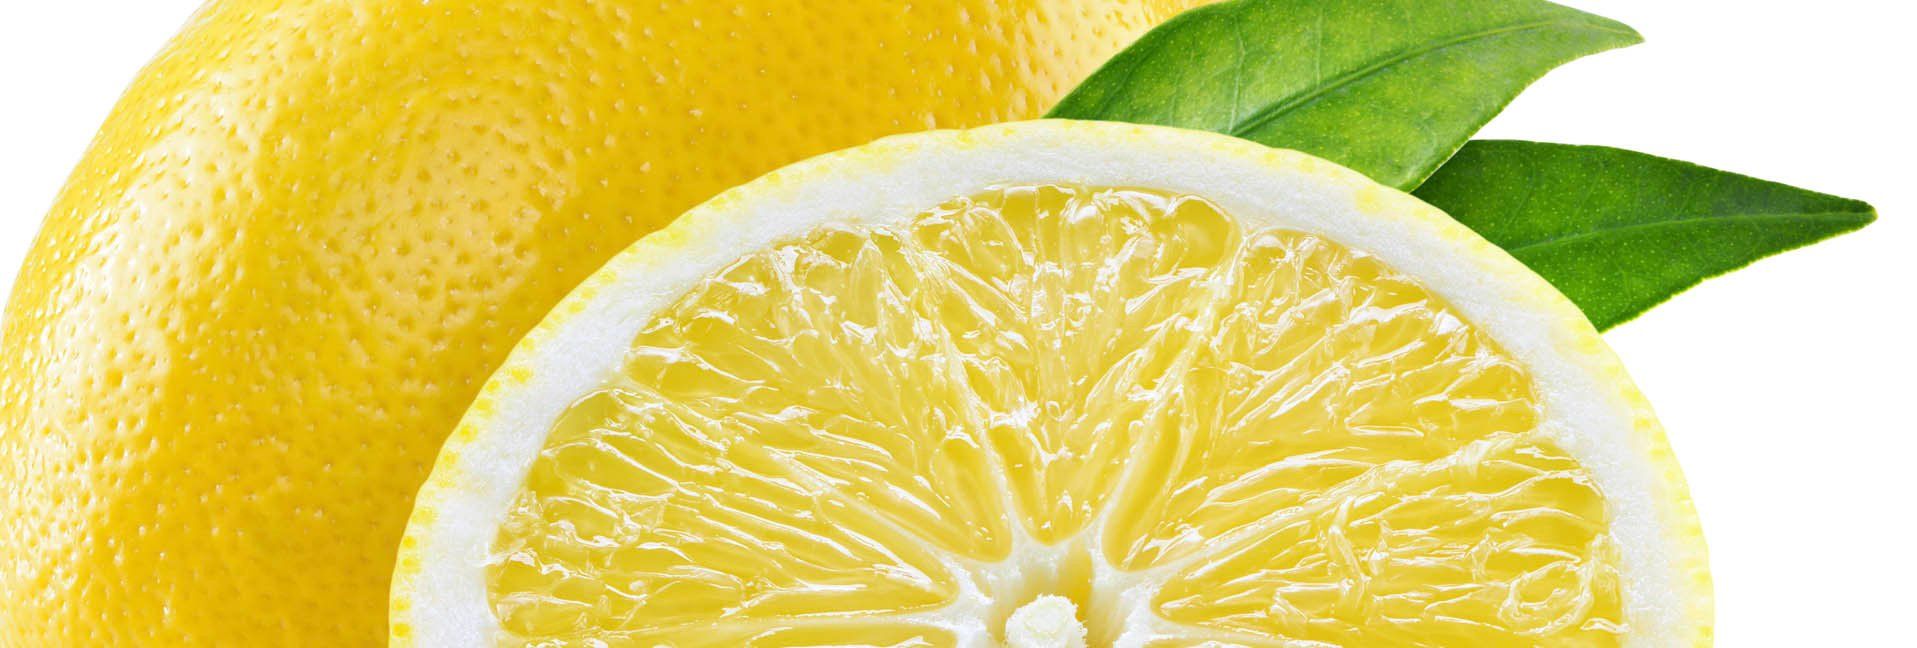 When Life Gives You Sunshine...Grow Lemons! You can raise this sunny citrus inside